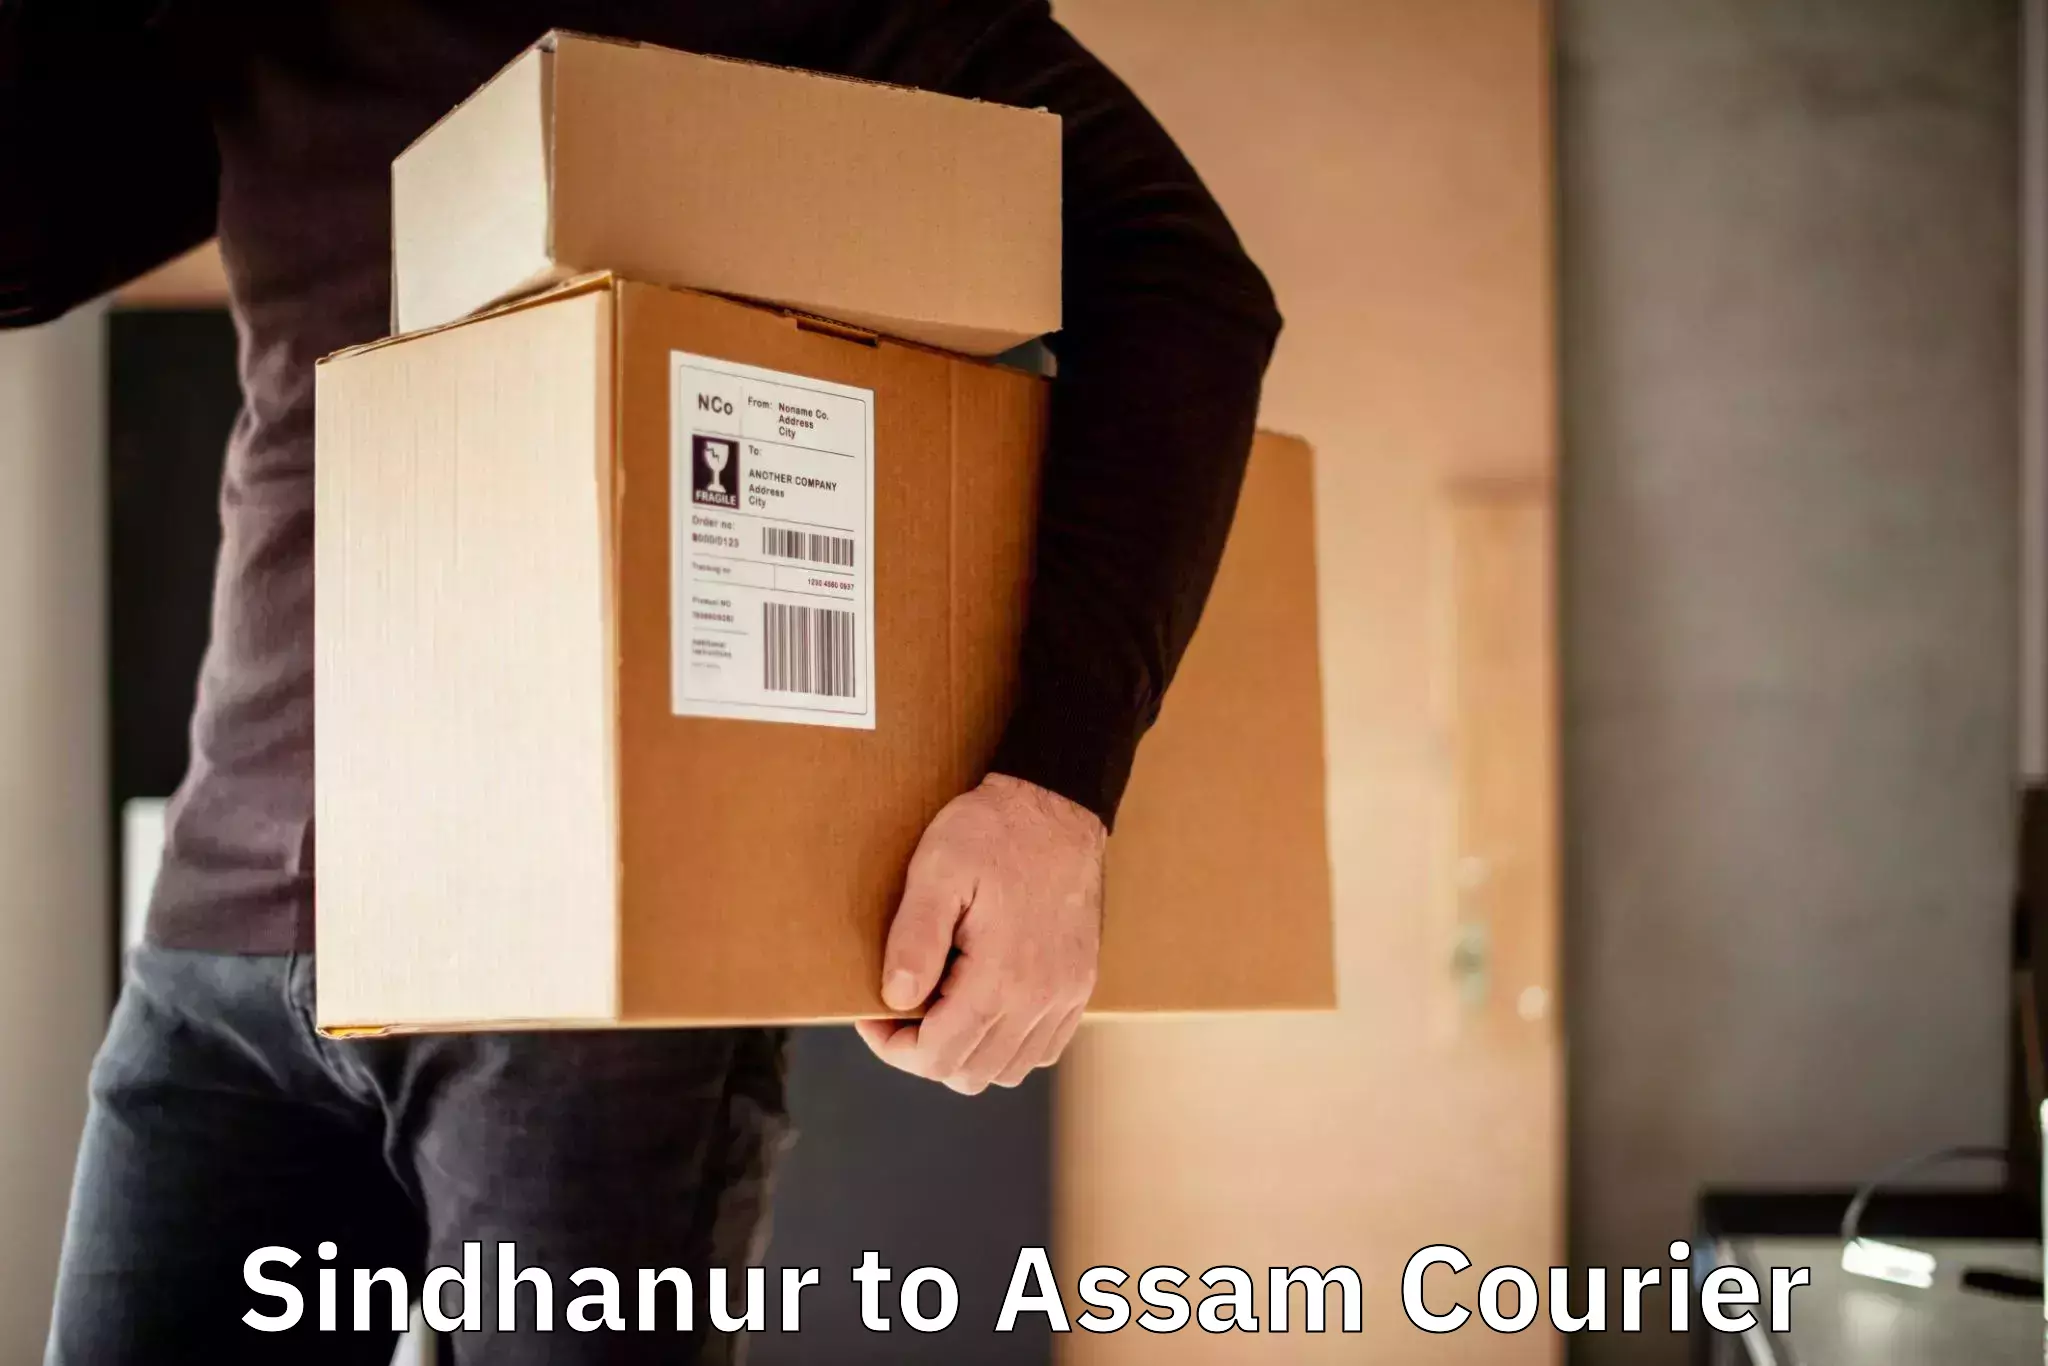 Courier service efficiency Sindhanur to Lala Assam